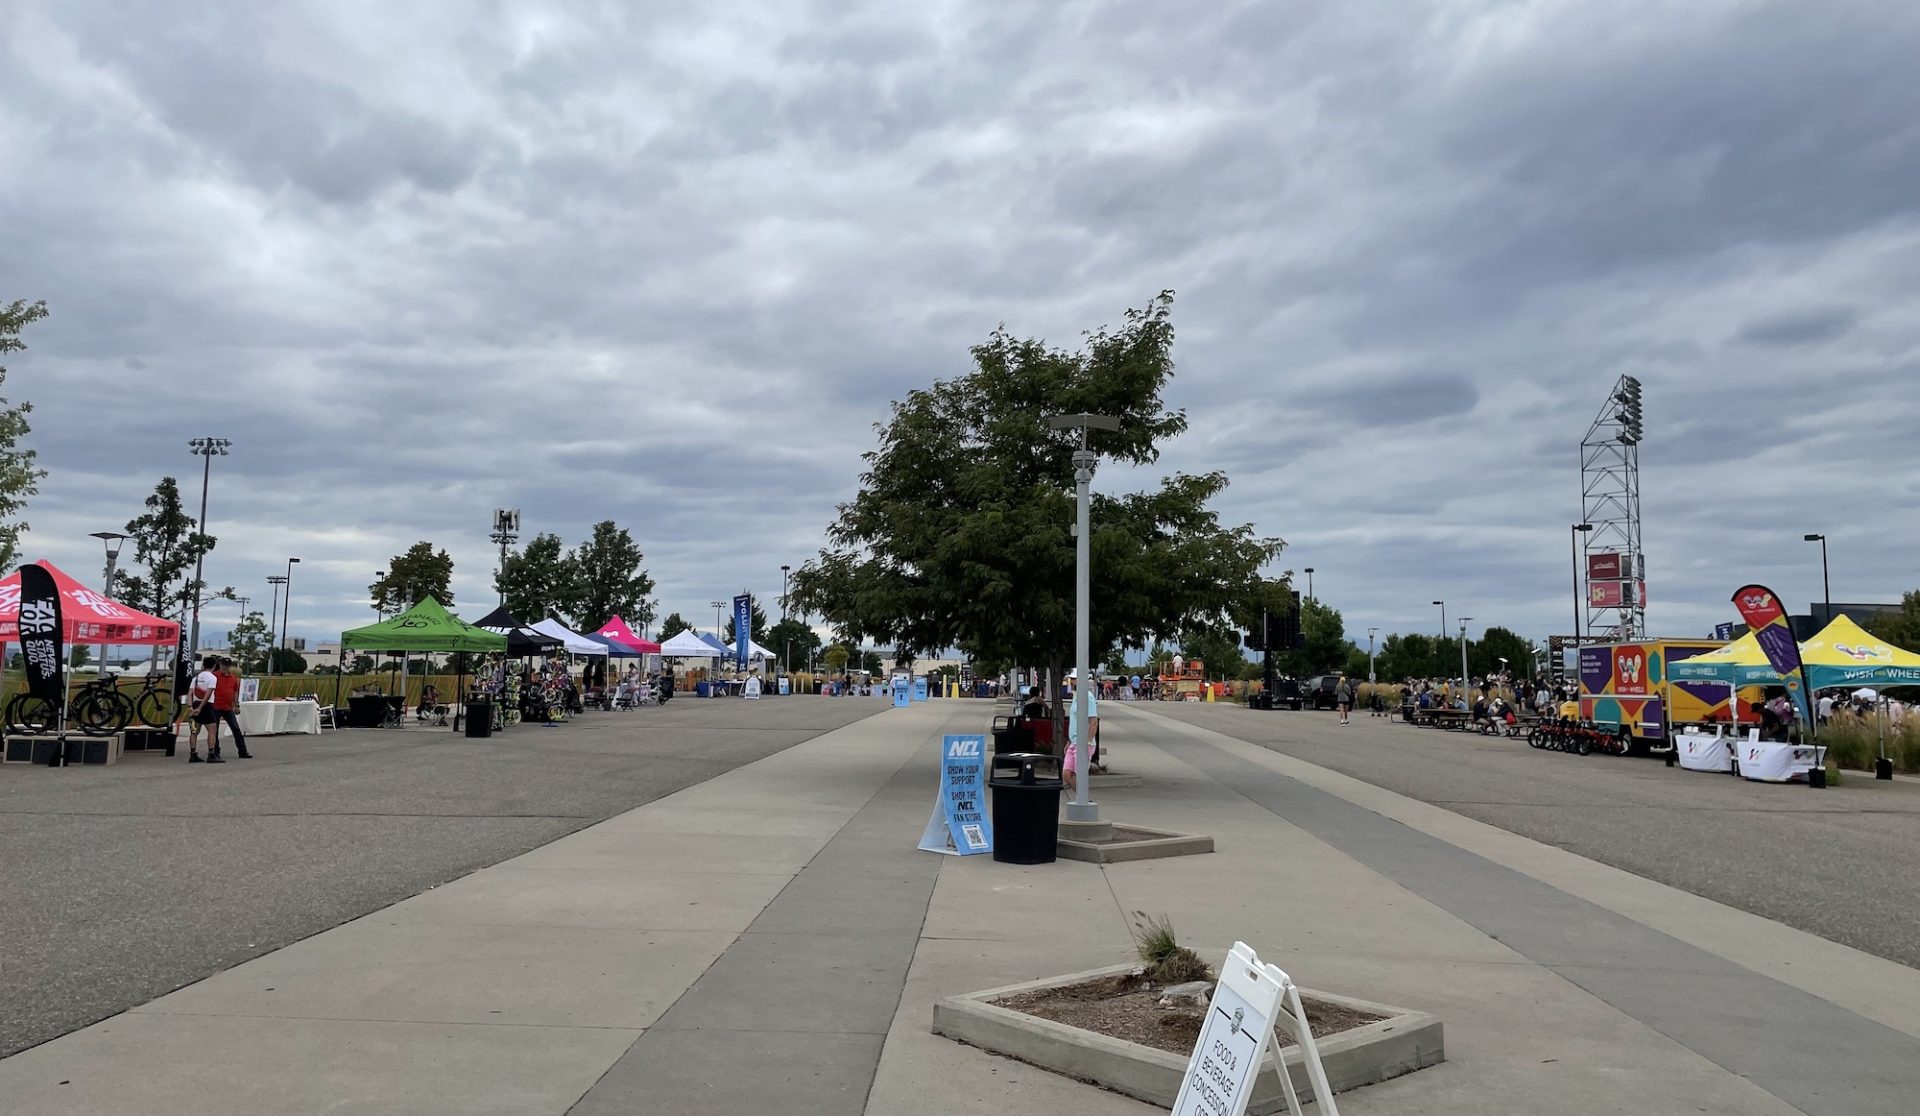 The fan zone expo at the Denver NCL Cup featured two rows of pop-up sponsor tents along a paved area with a central landscape section of trees. There are very few fans present, and the expo area is almost entirely empty of people.